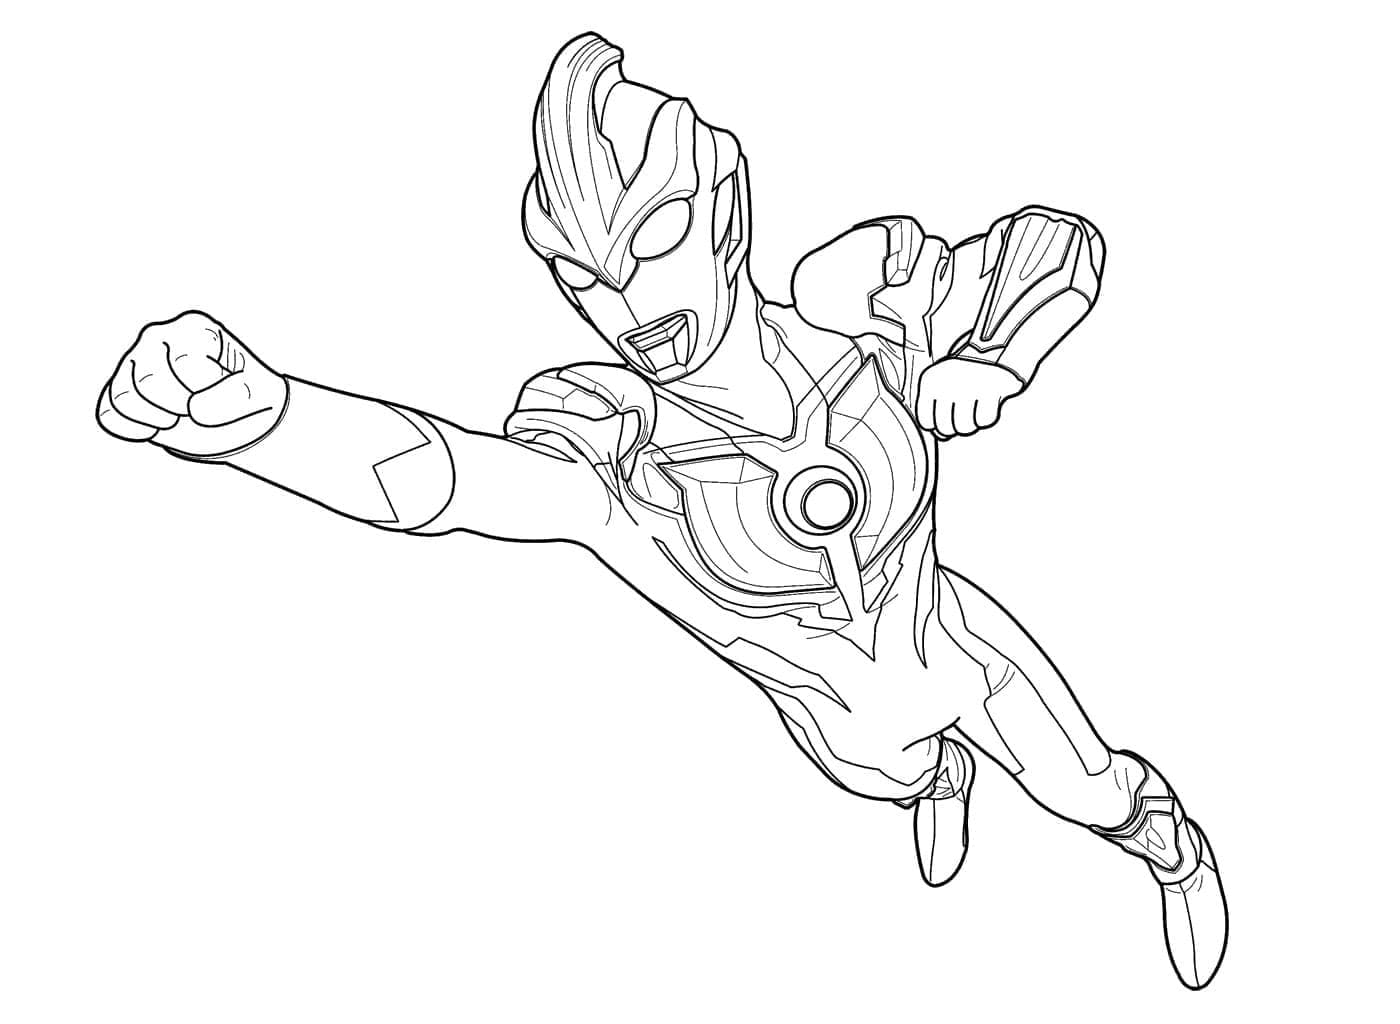 Ultraman Volant coloring page